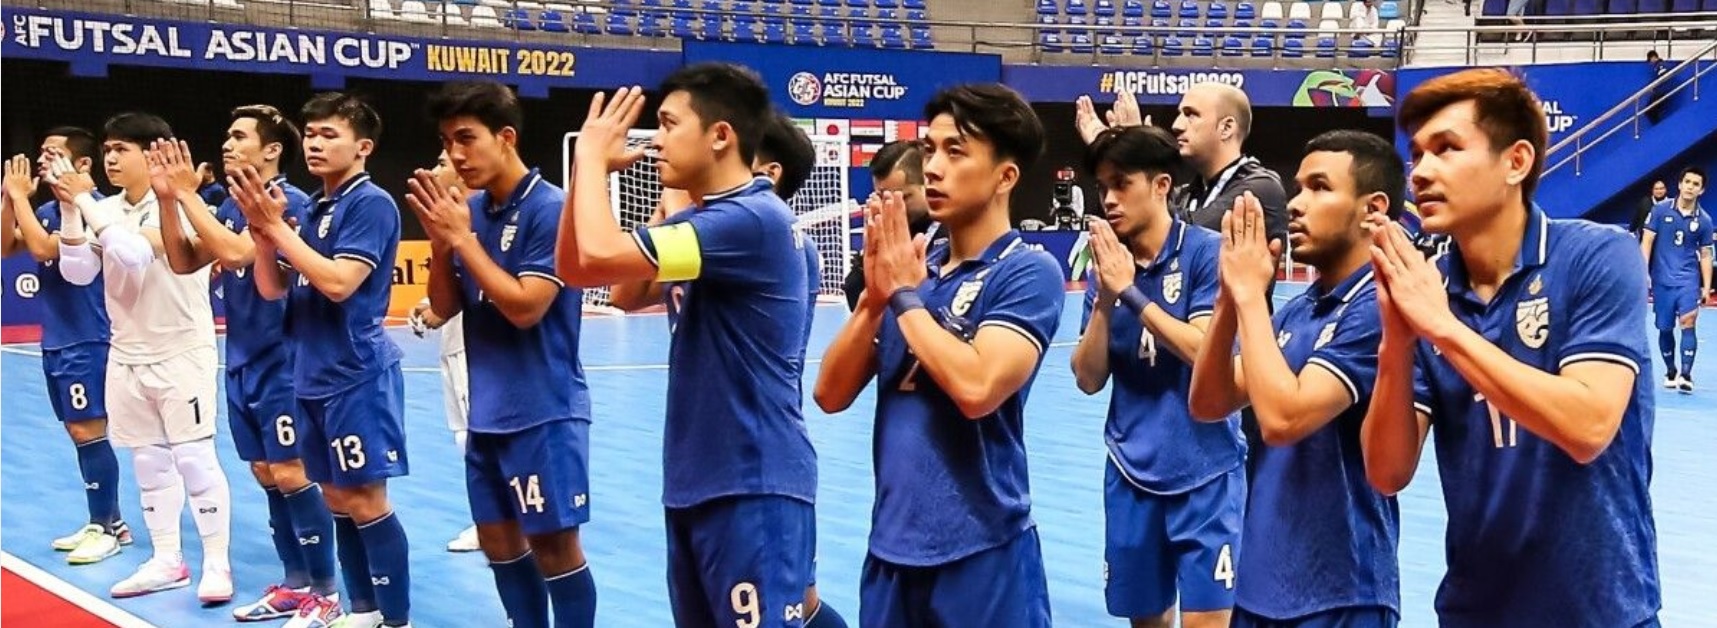 Iran and Japan ready to face off for the eighth time in the AFC Futsal Asian Cup Final